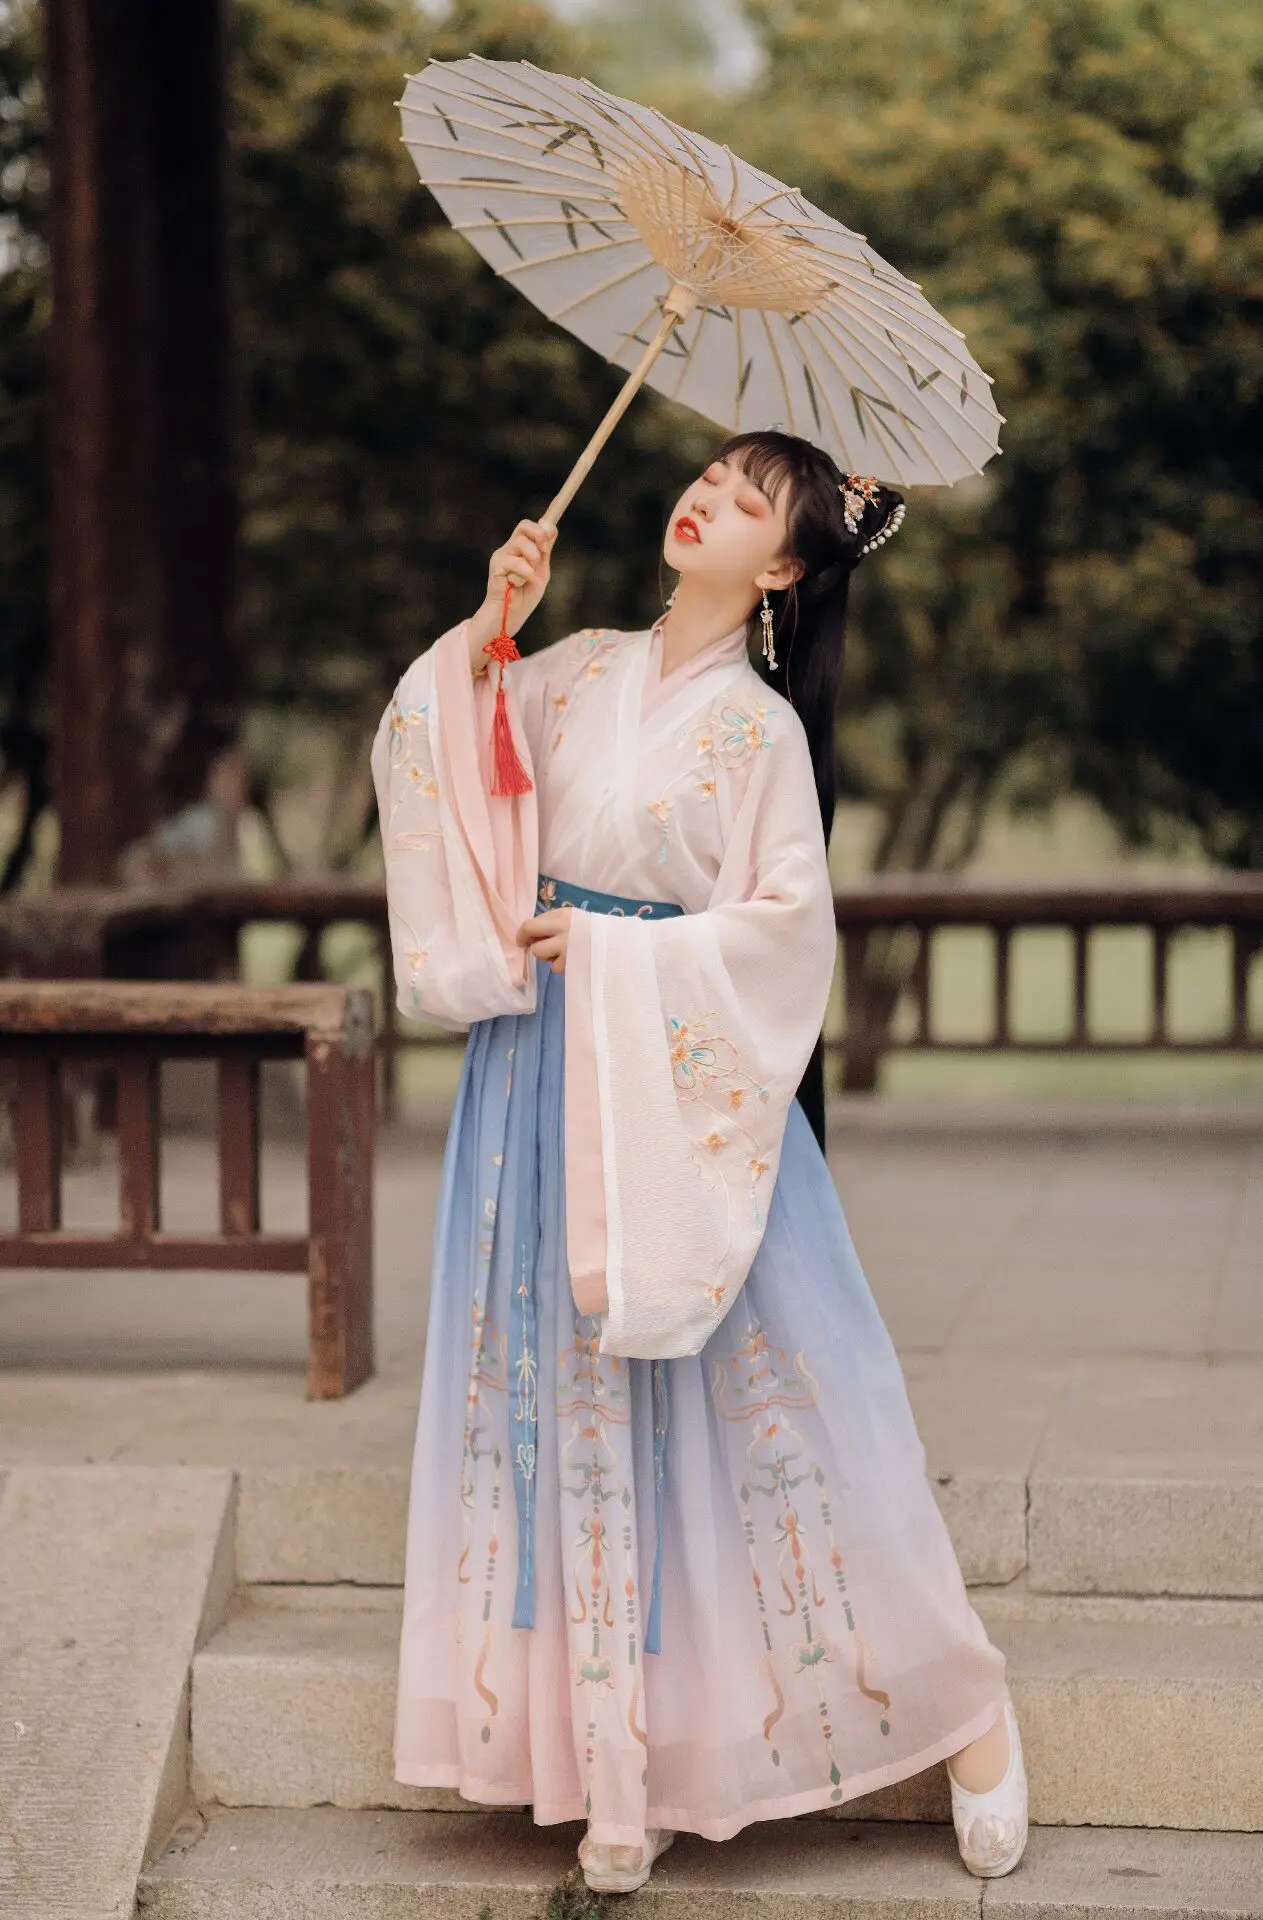 Women Hanfu Dress Traditional Chinese Cloth Outfit Ancient Folk Dance Stage Costumes Oriental Fairy Princess Cosplay images - 6